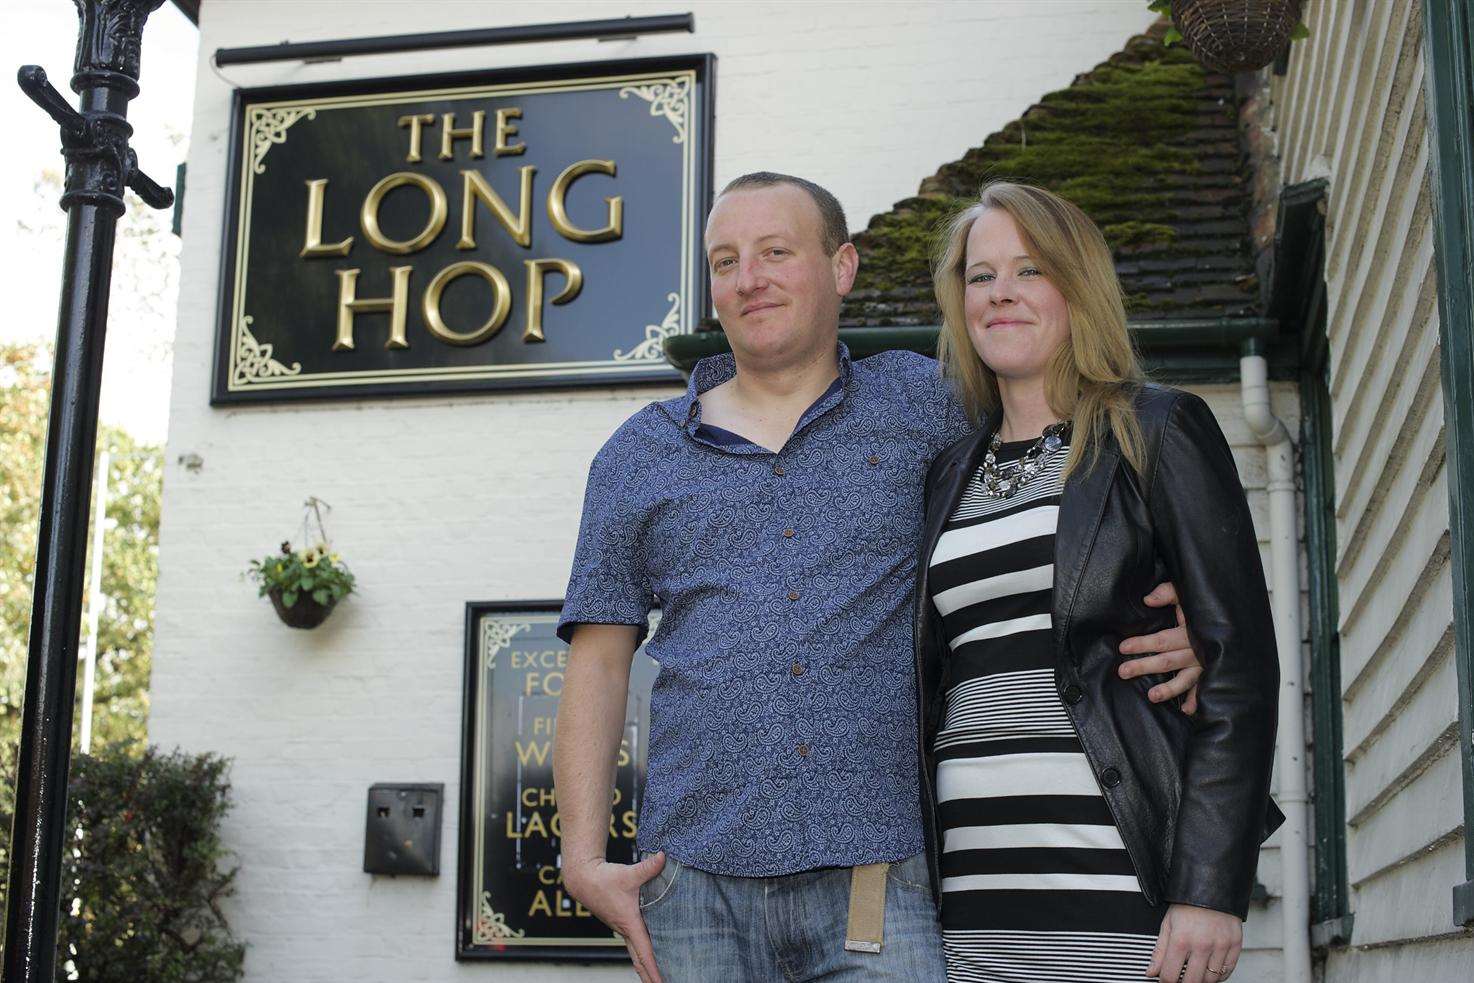 The Long Hop pub is now open for business again five months after shutting its doors